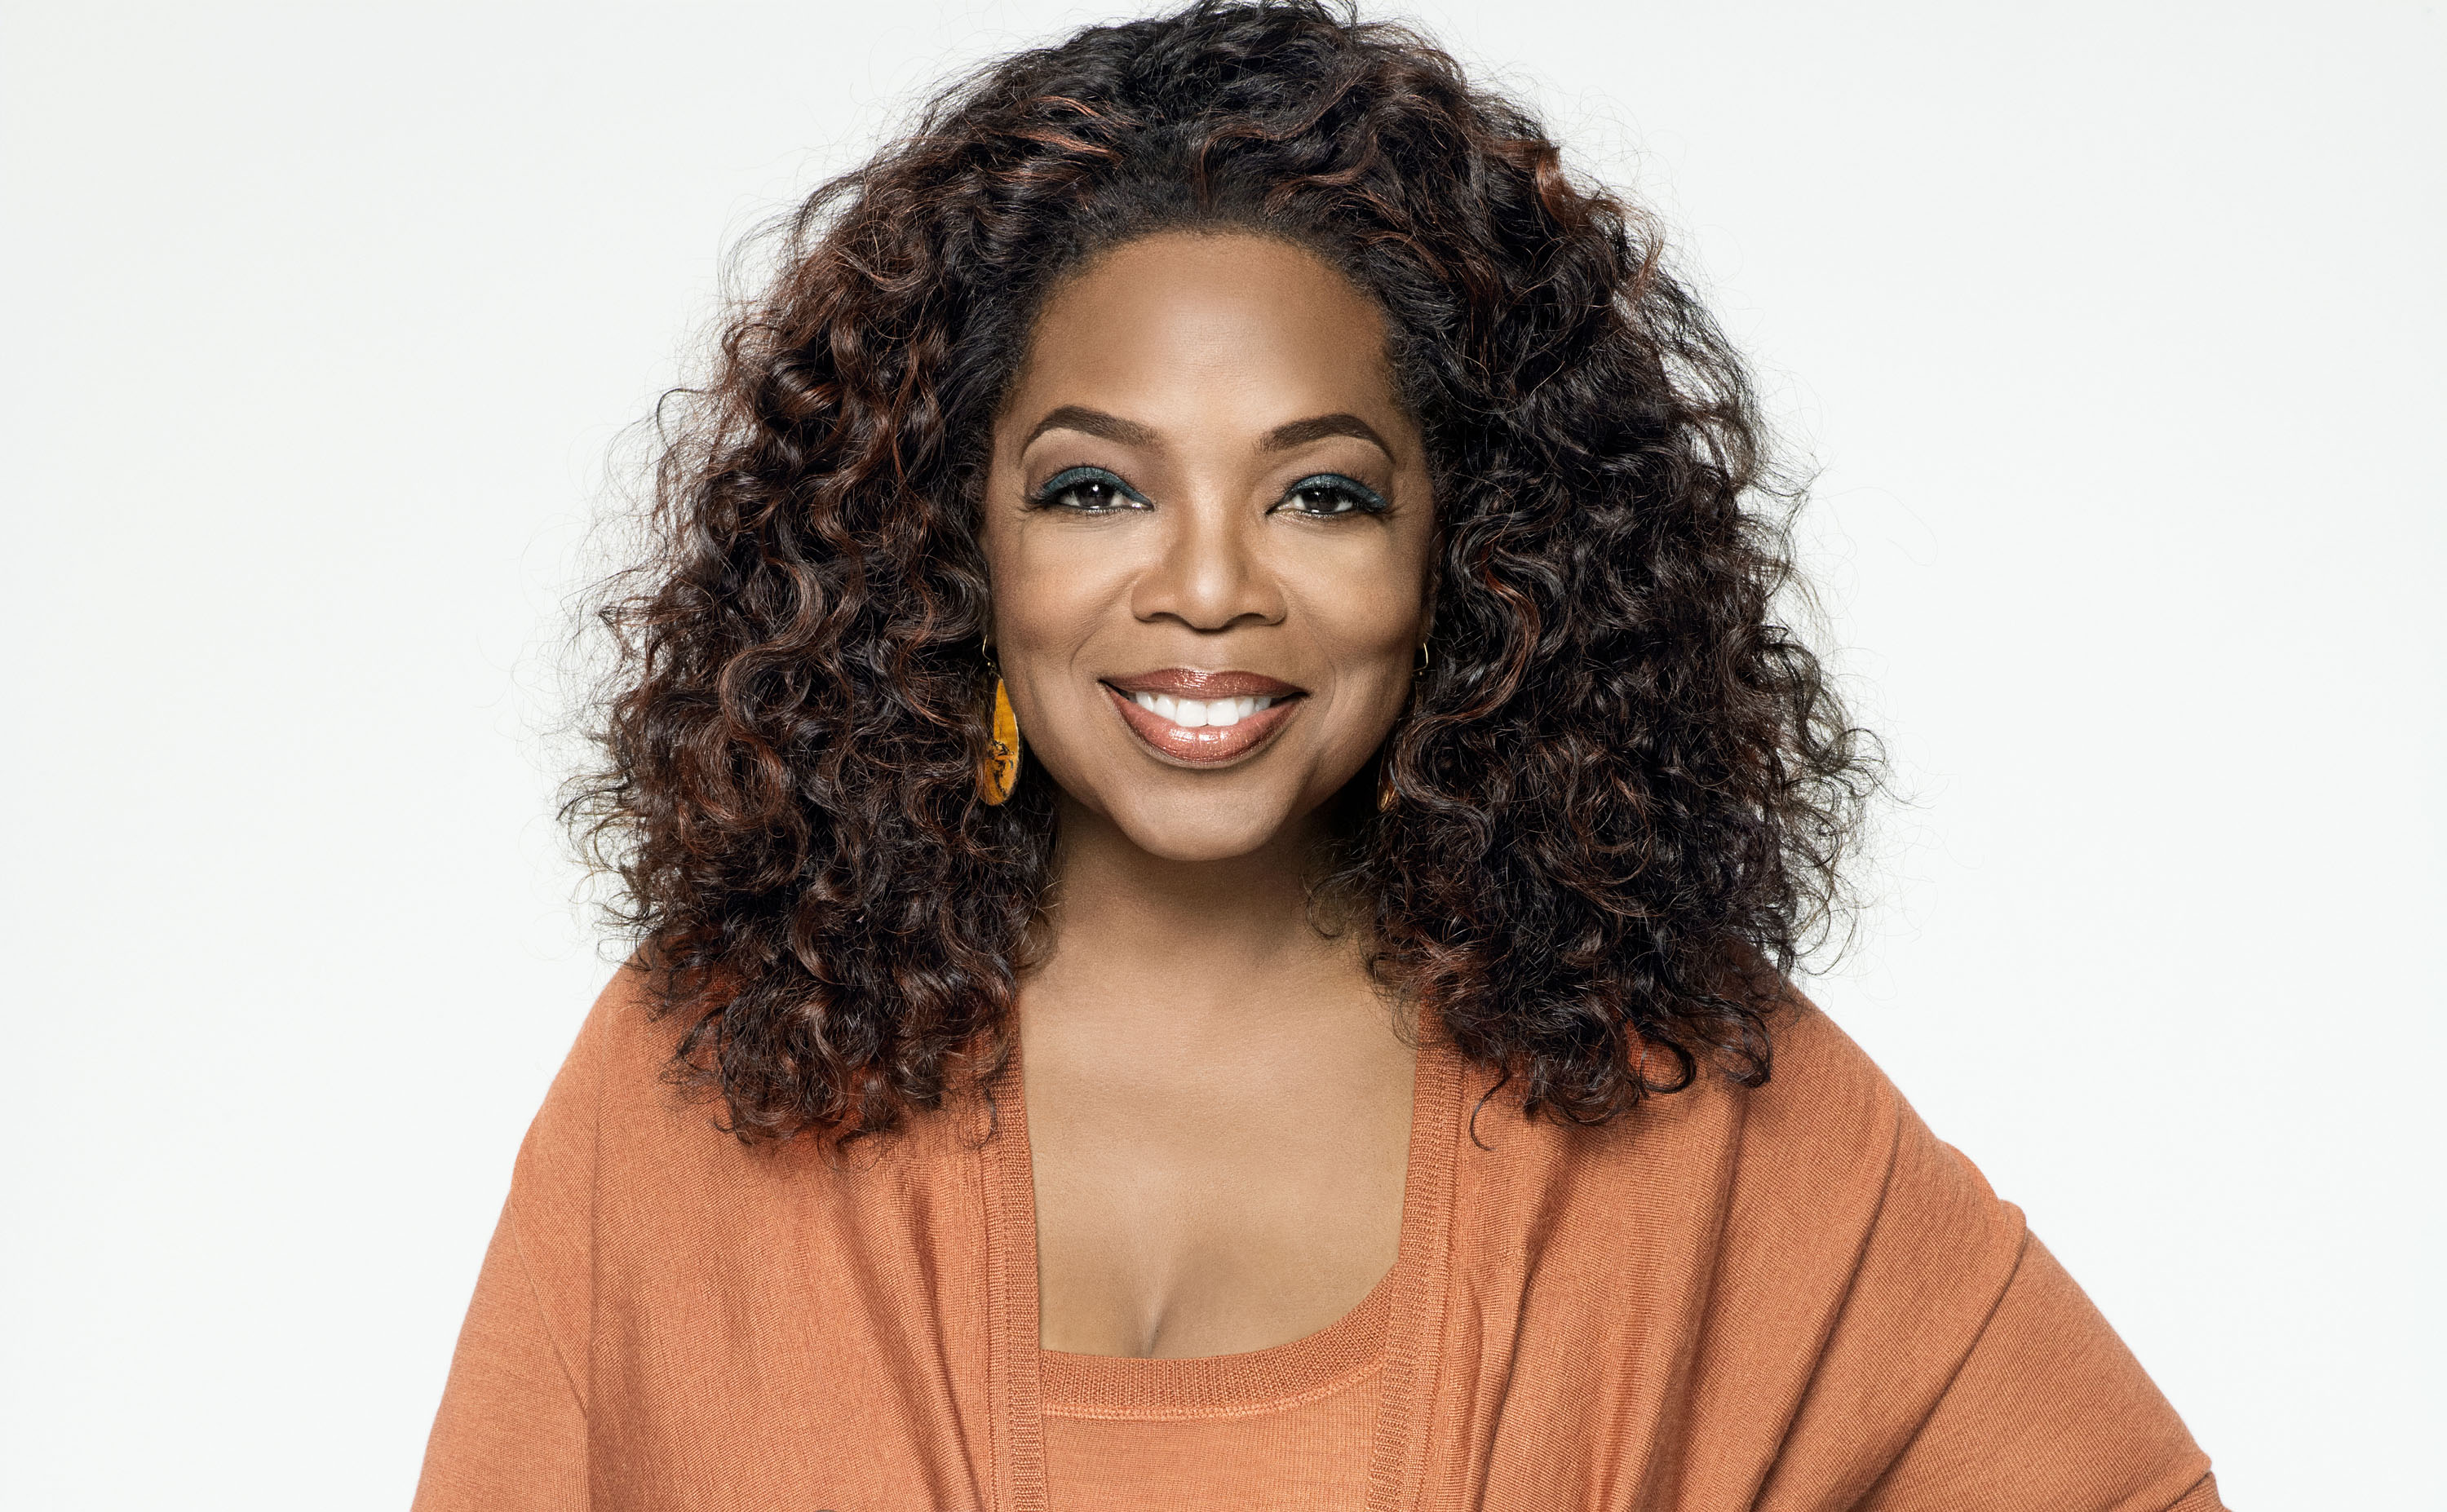 oprah-s-new-ad-gives-weight-watchers-a-massive-gain-in-shares-b-t